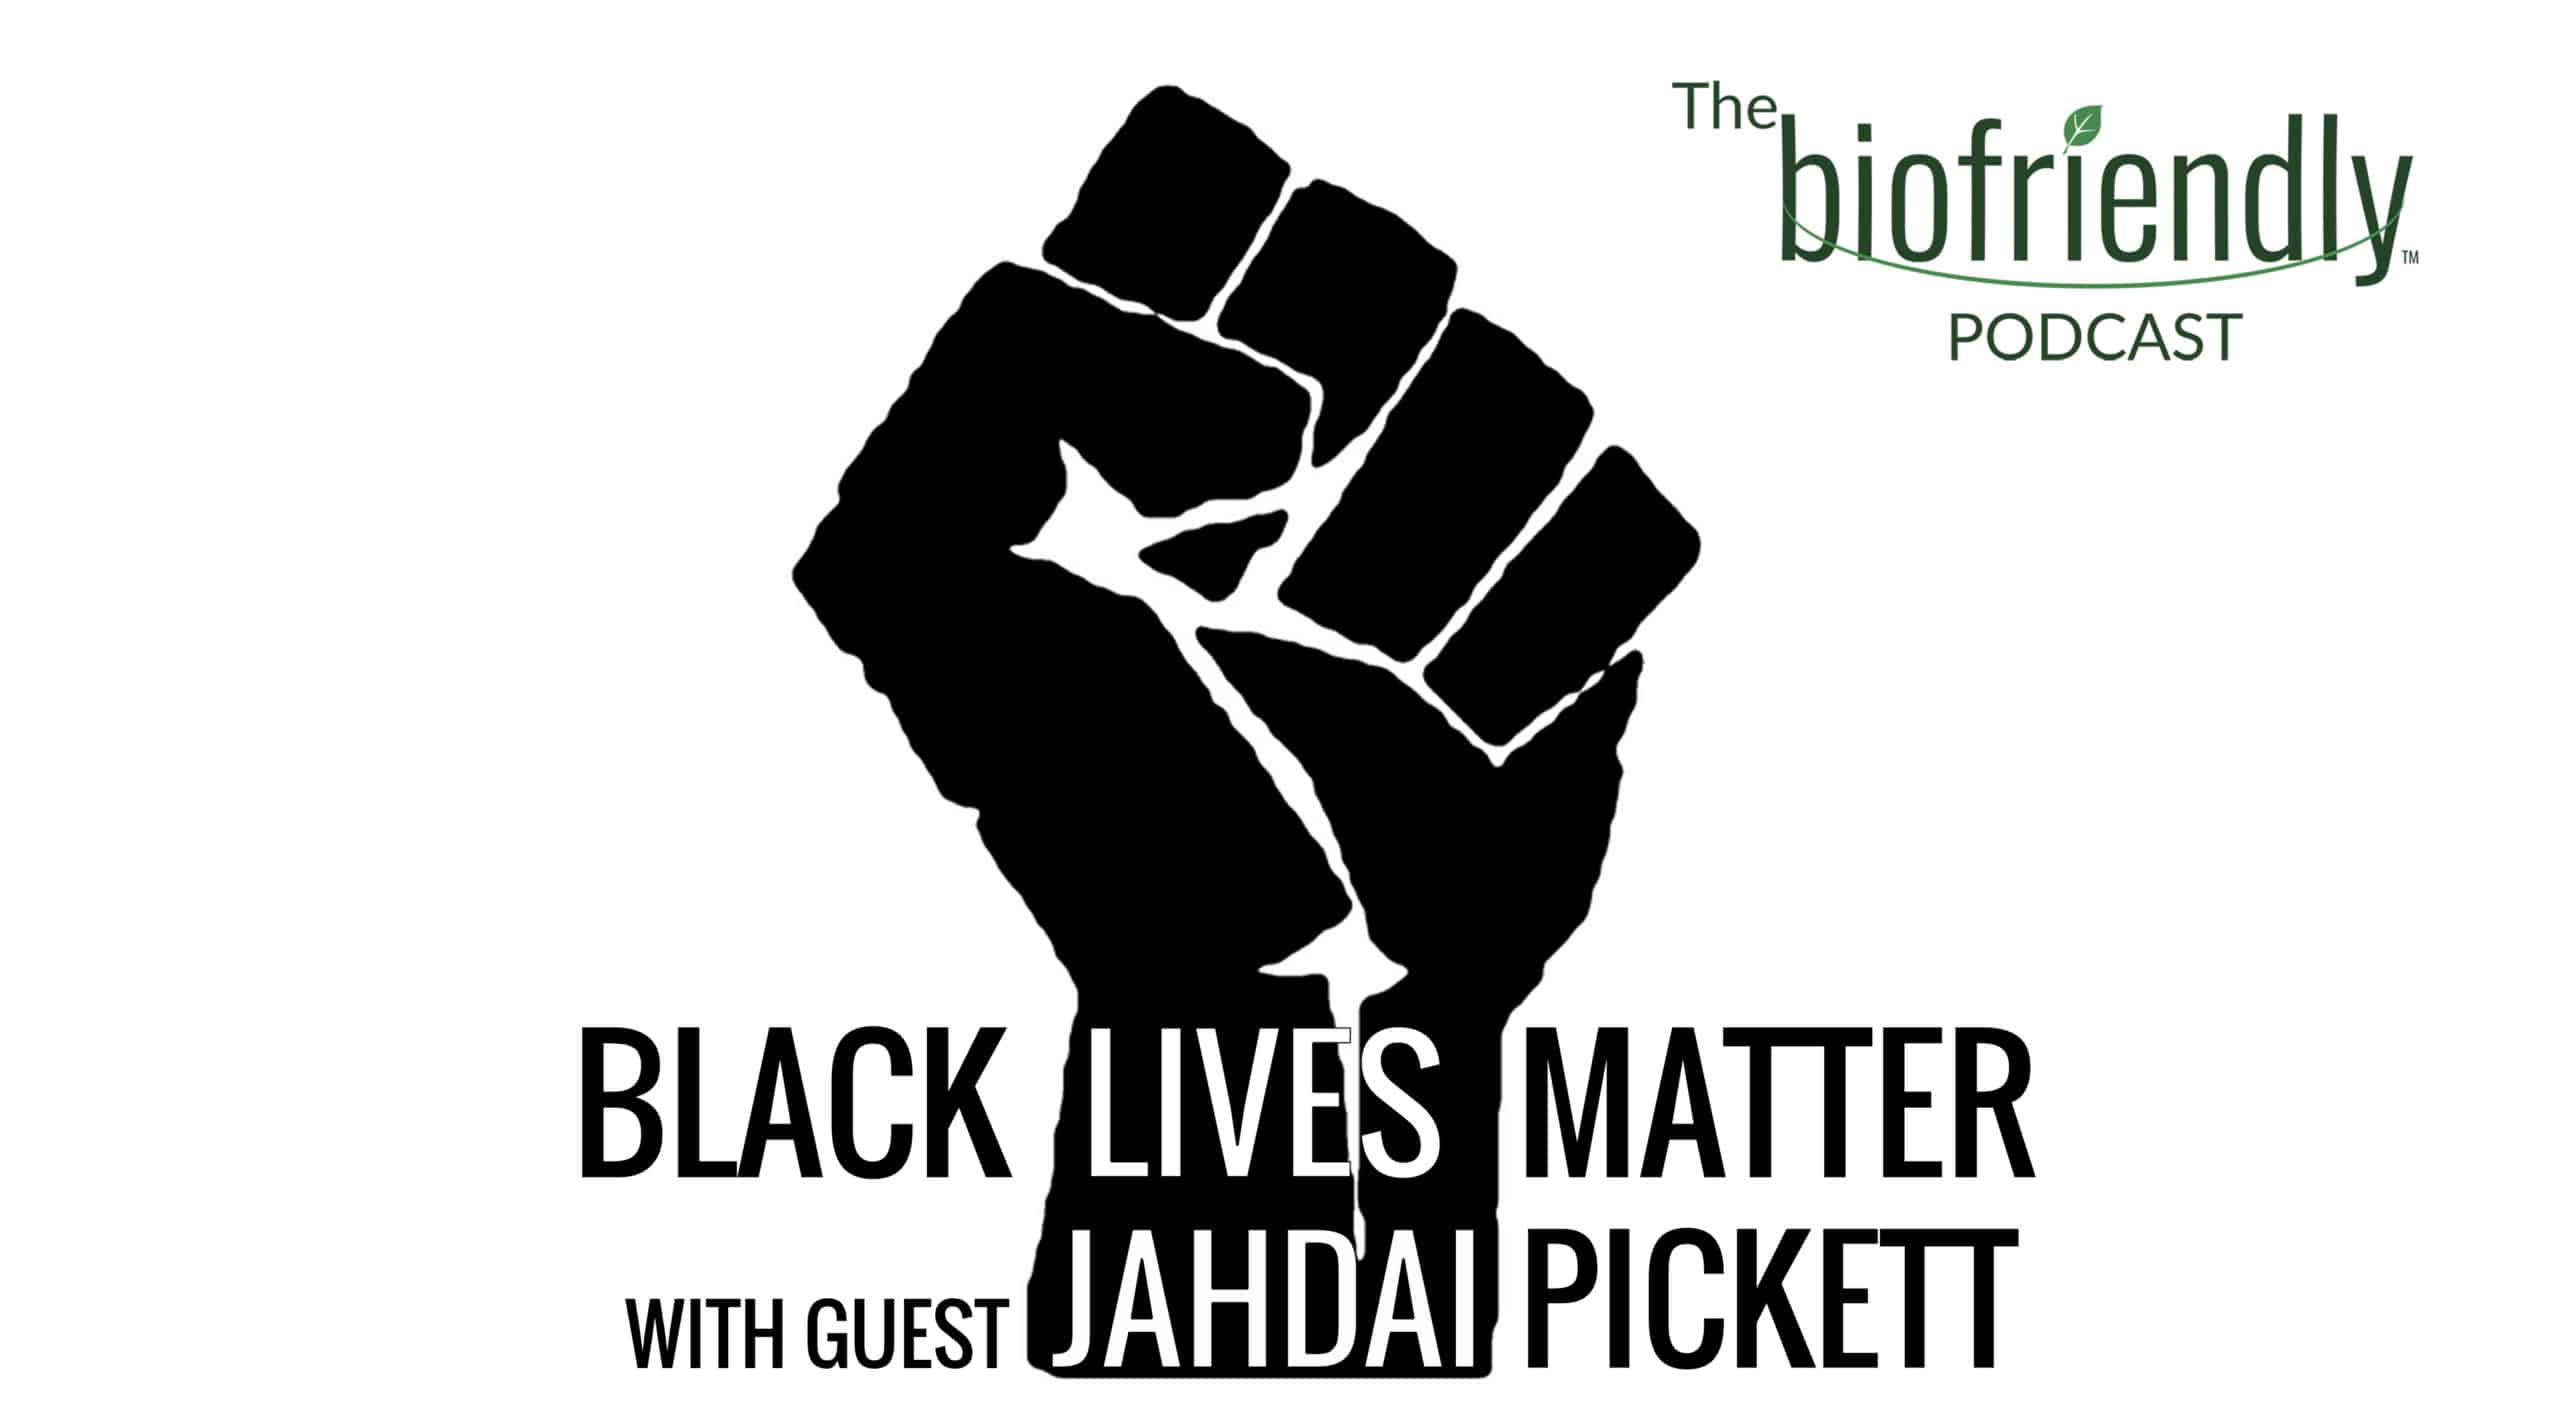 The Biofriendly Podcast - Episode 67 - Black Lives Matter with guest Jahdai Pickett